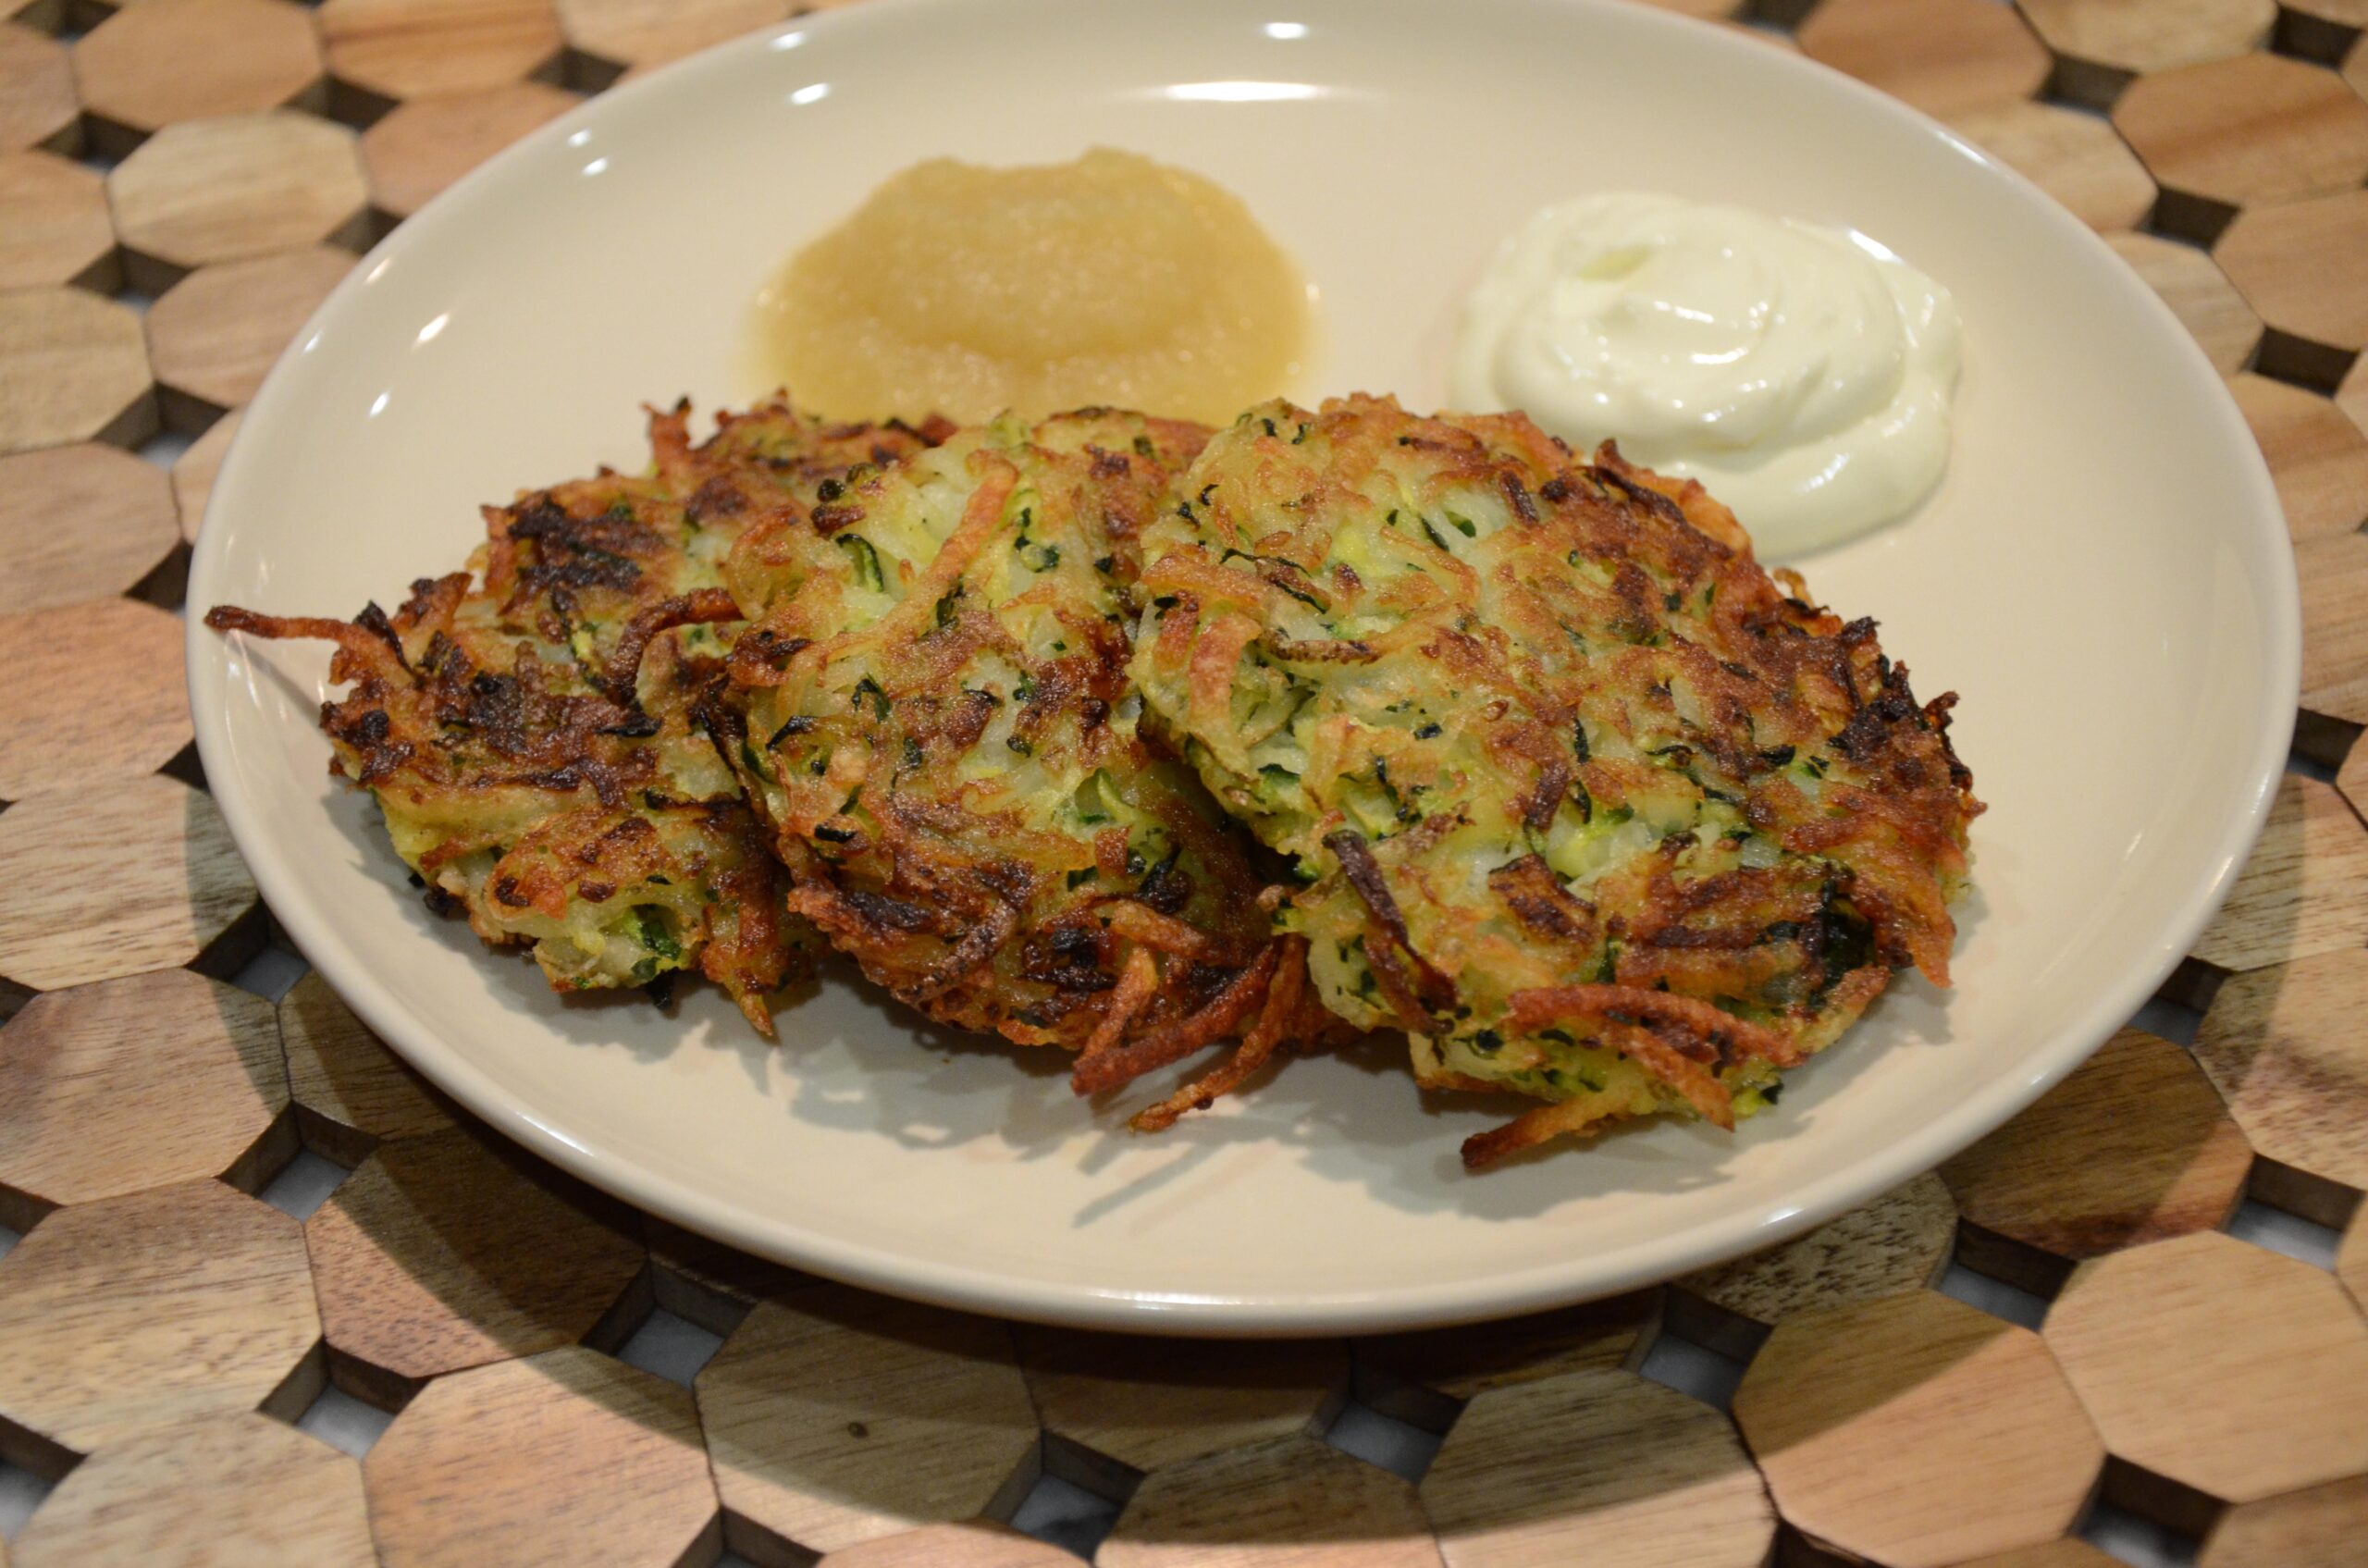  These latkes are packed with veggies, but you'll never guess by how delicious they are.